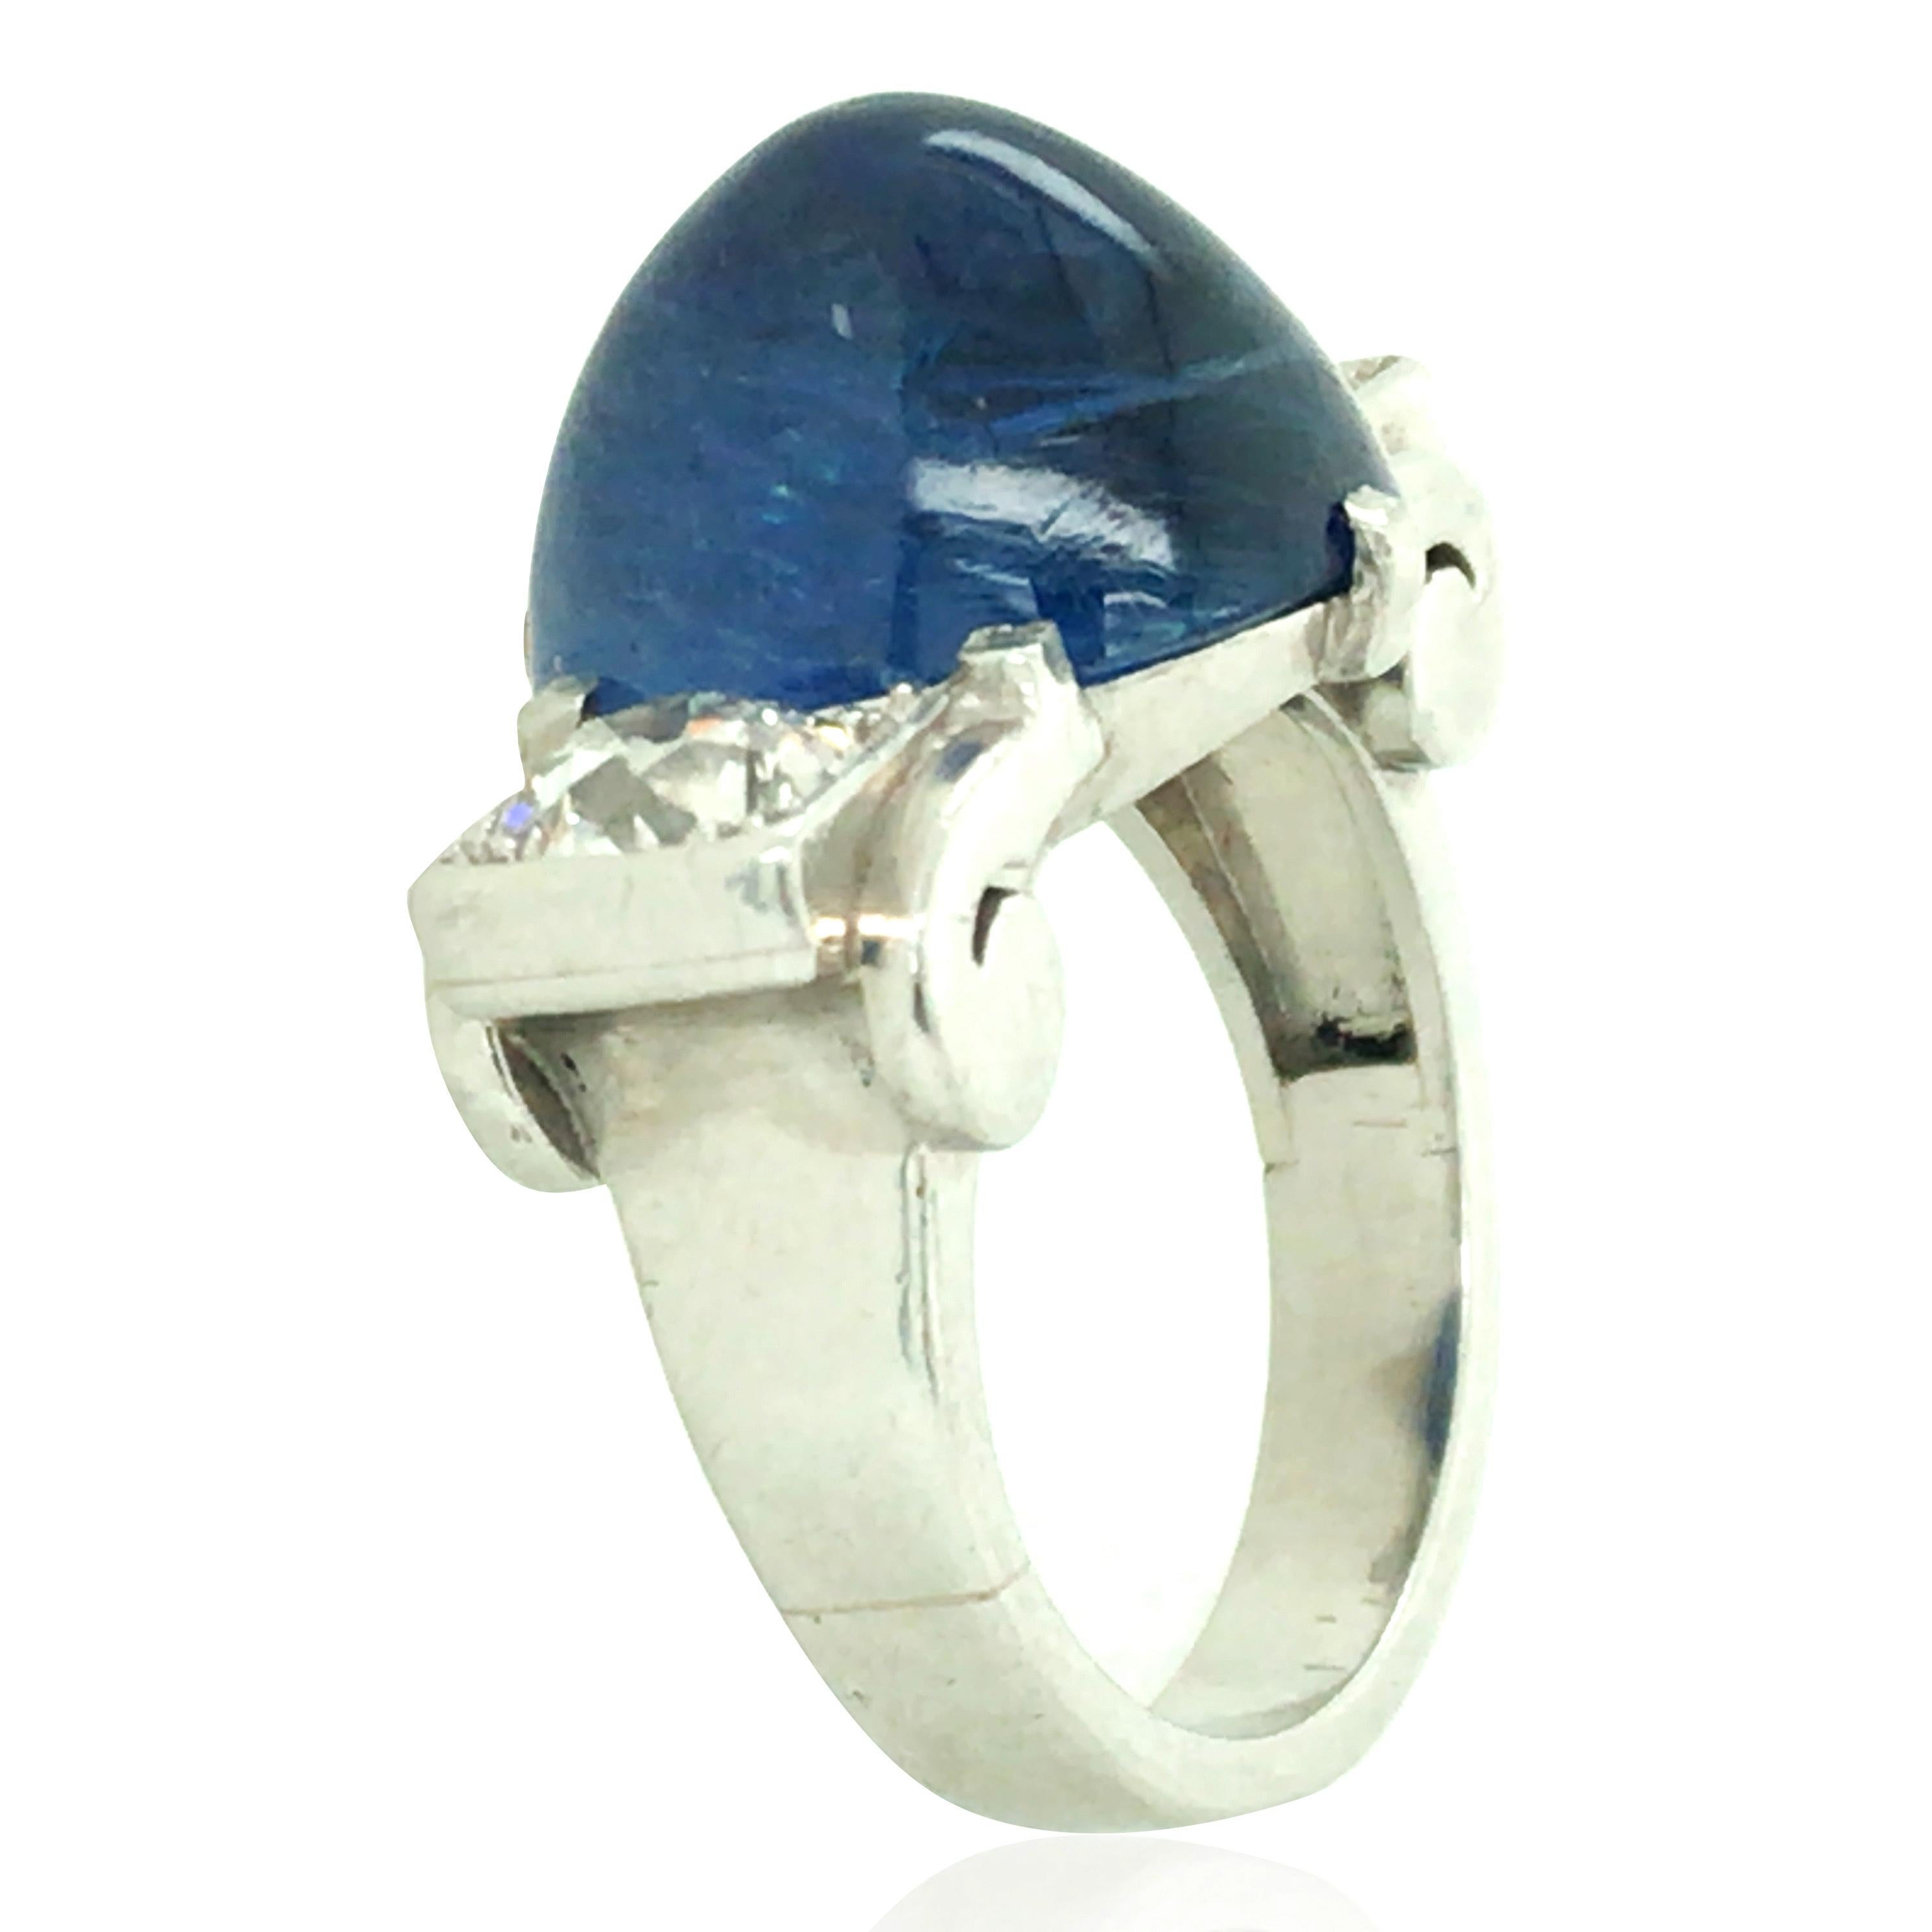 This ring consists of one 14.61ct cabochon-cut sapphire and two round-cut diamonds. Diamond approx. 1ct in total. Ring size: 5.75

Sapphire: 14.61ct
Diamond: 1.3ct
Weight: 13.4grams